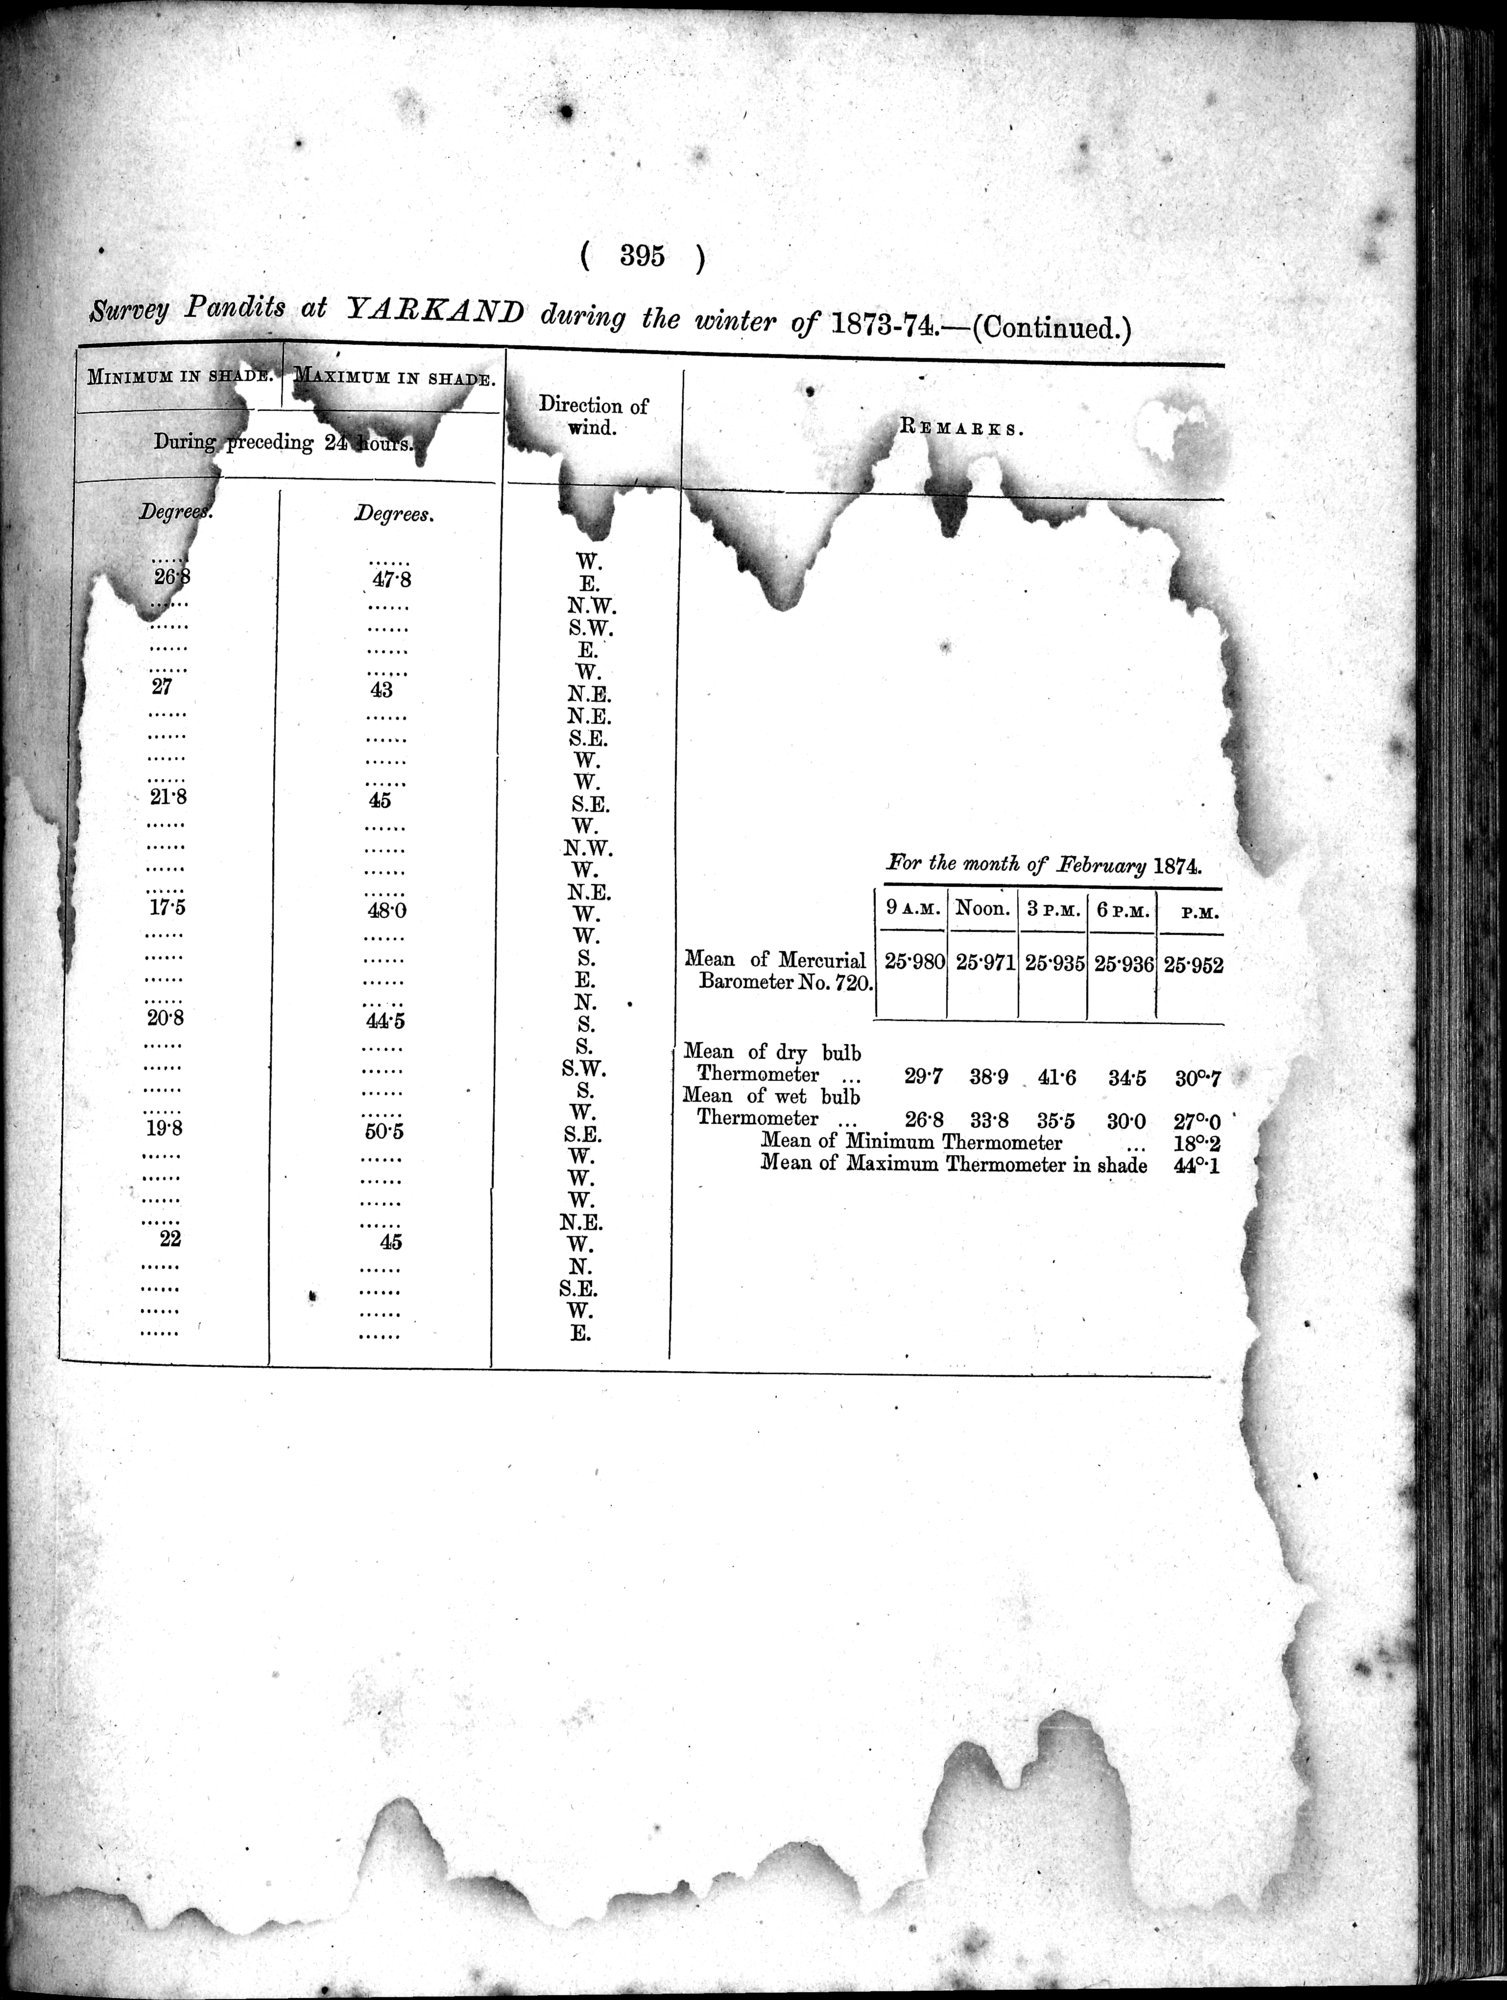 Report of a Mission to Yarkund in 1873 : vol.1 / Page 529 (Grayscale High Resolution Image)